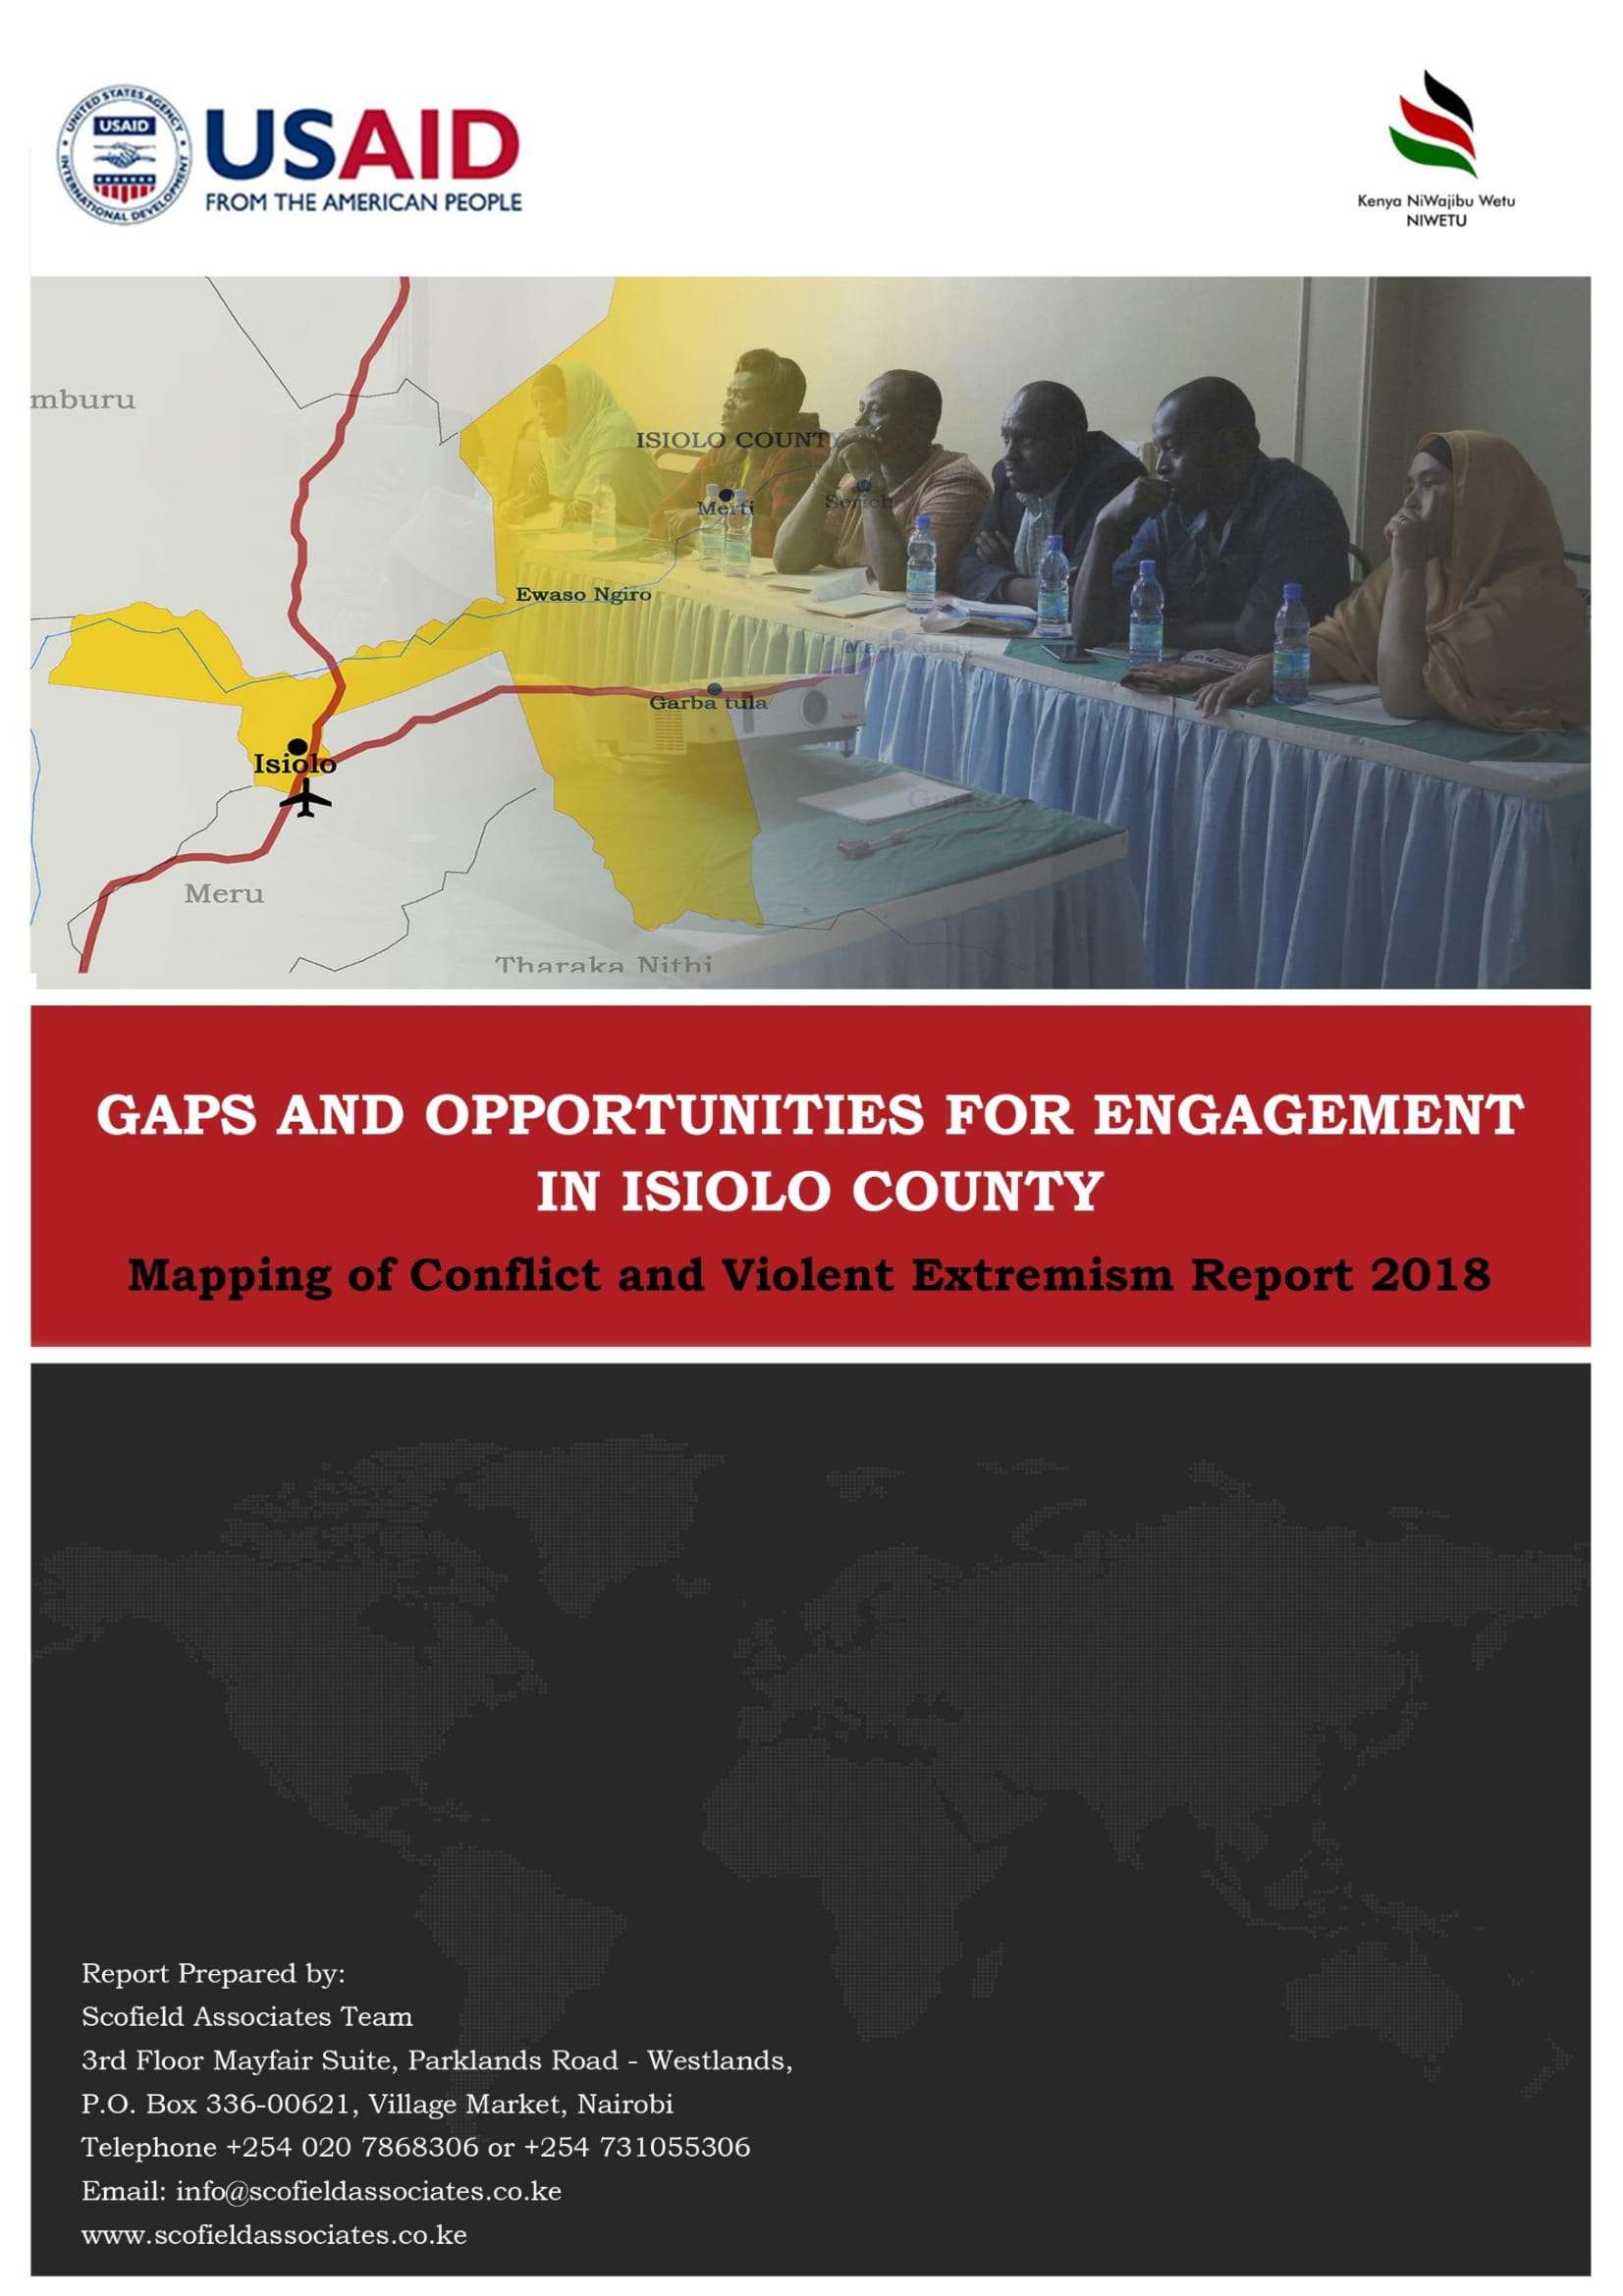 Gaps and Opportunities for CVE engagement in Isiolo report cover